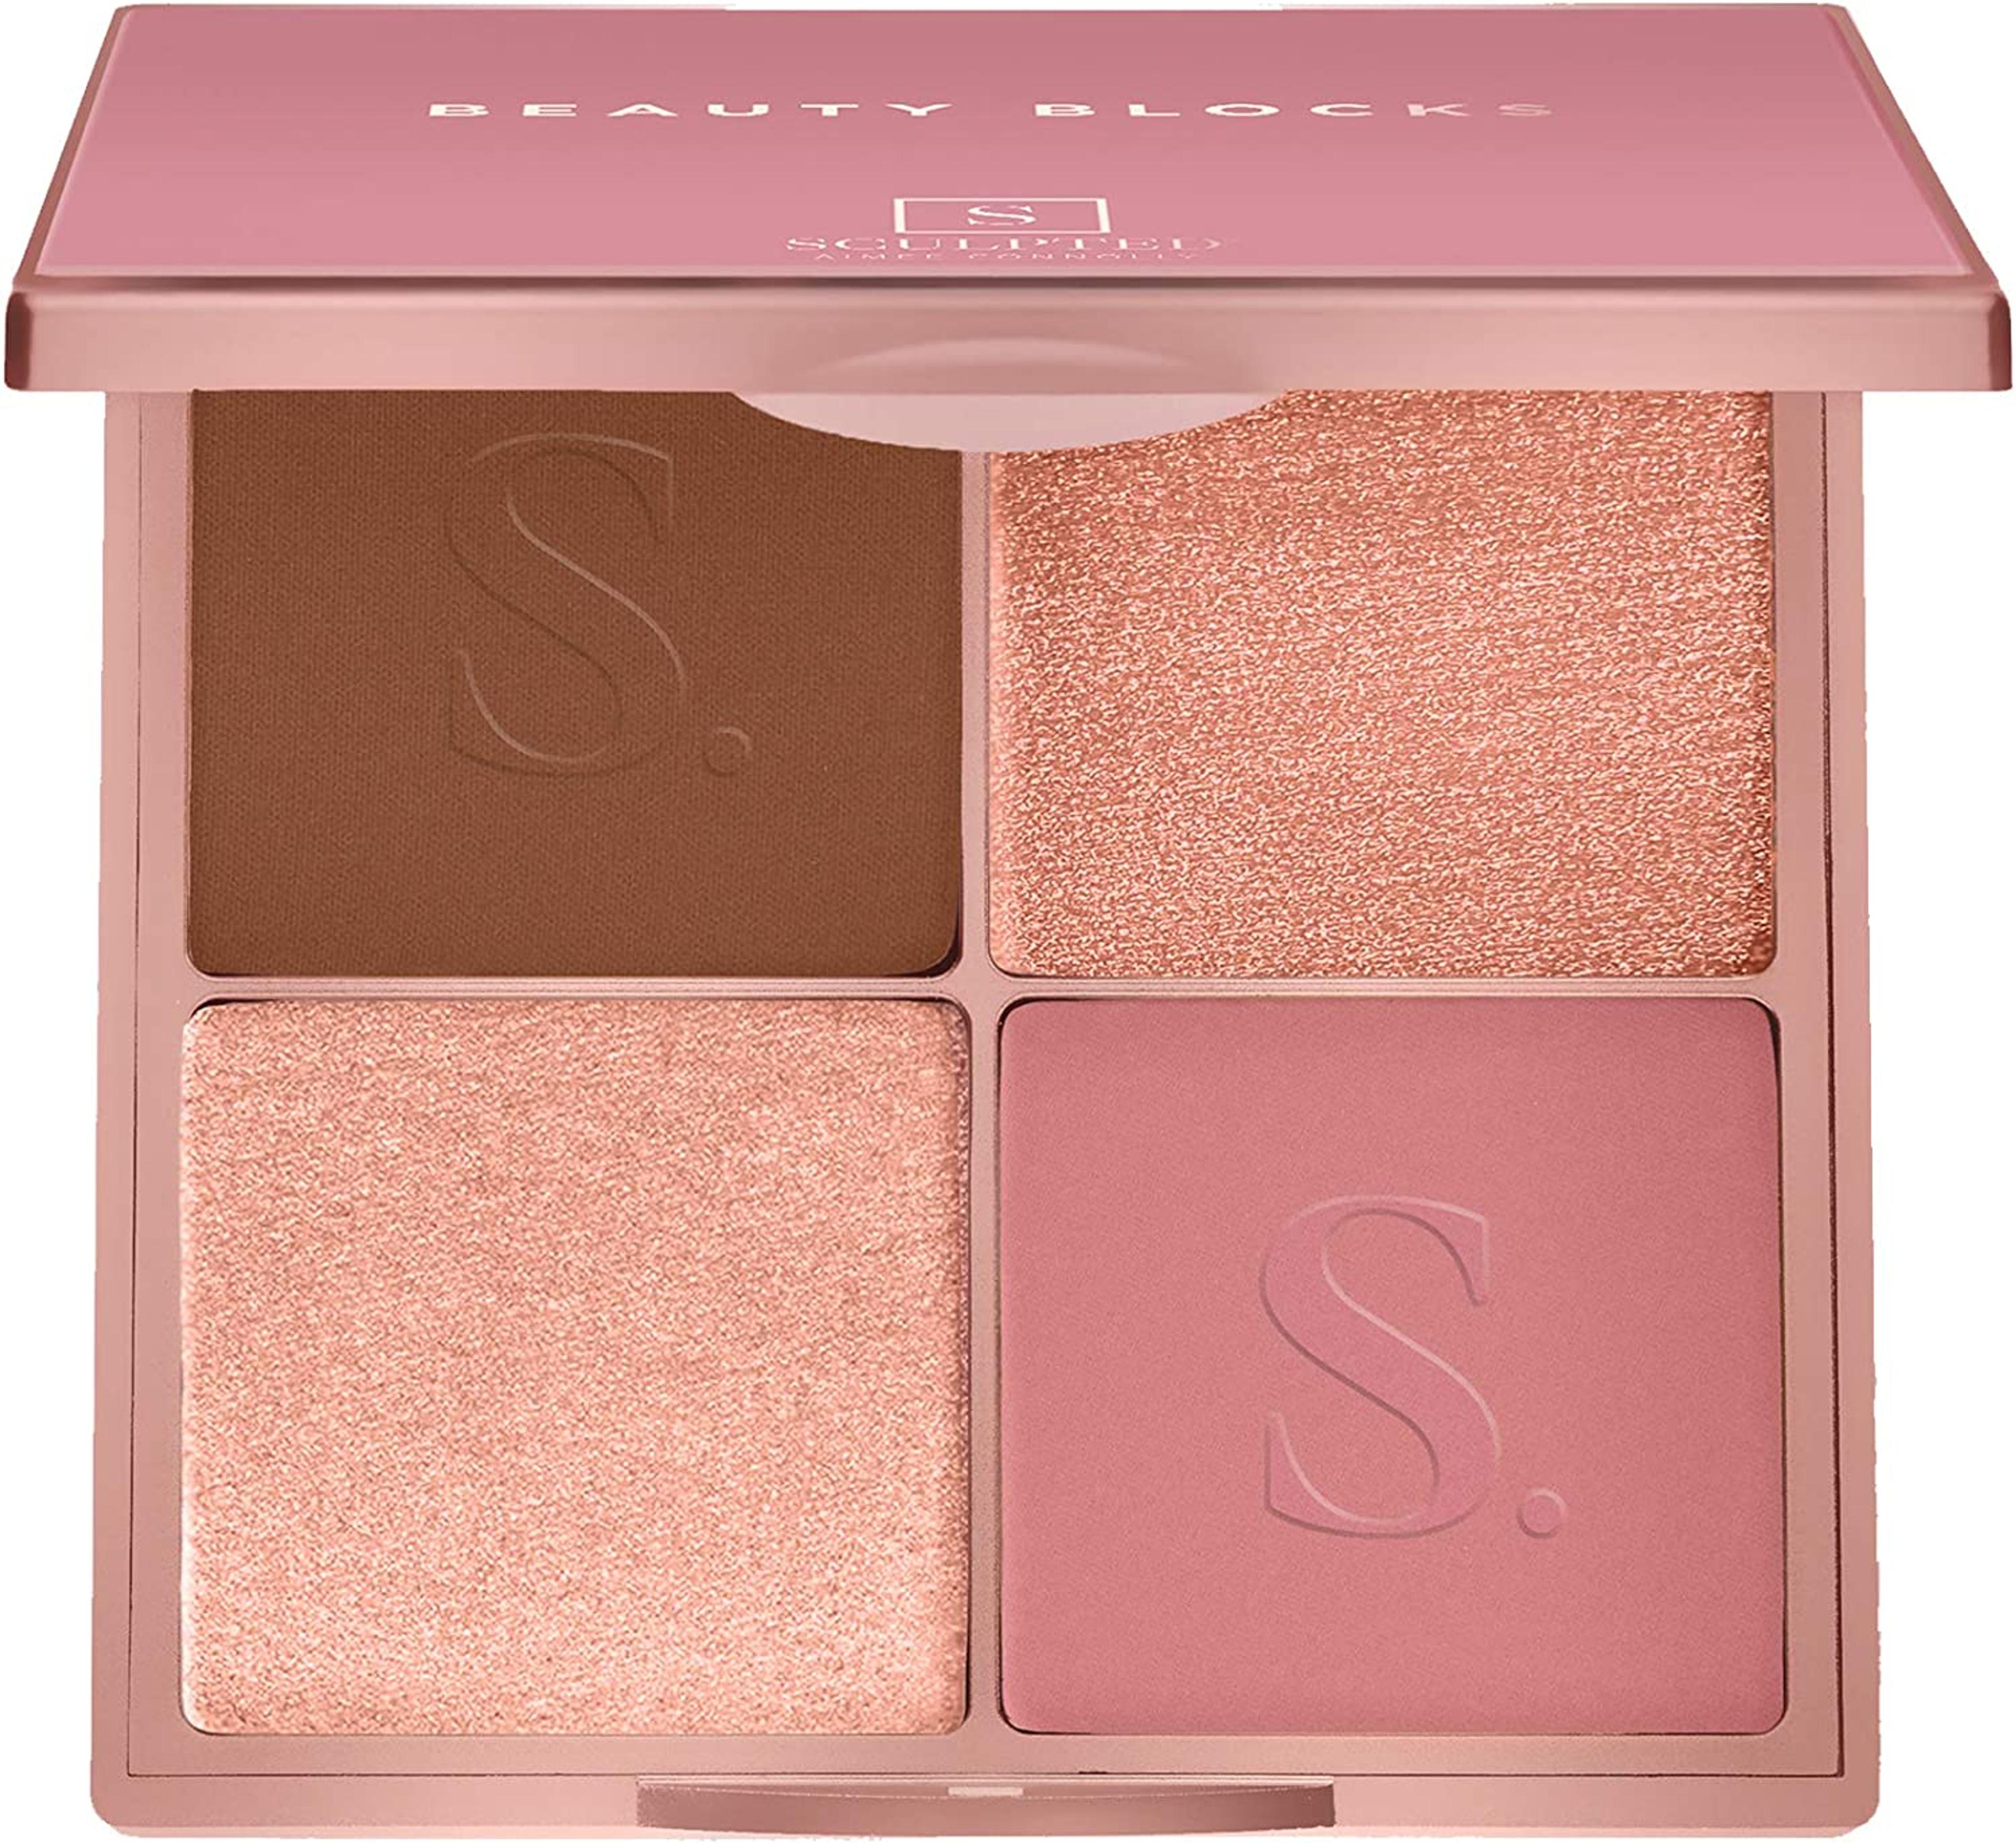 Sculpted 4 in 1 Beauty Blocks, Blush and Cream Complete Makeup Face Contour Palette 12g (Deep) - BigaMart